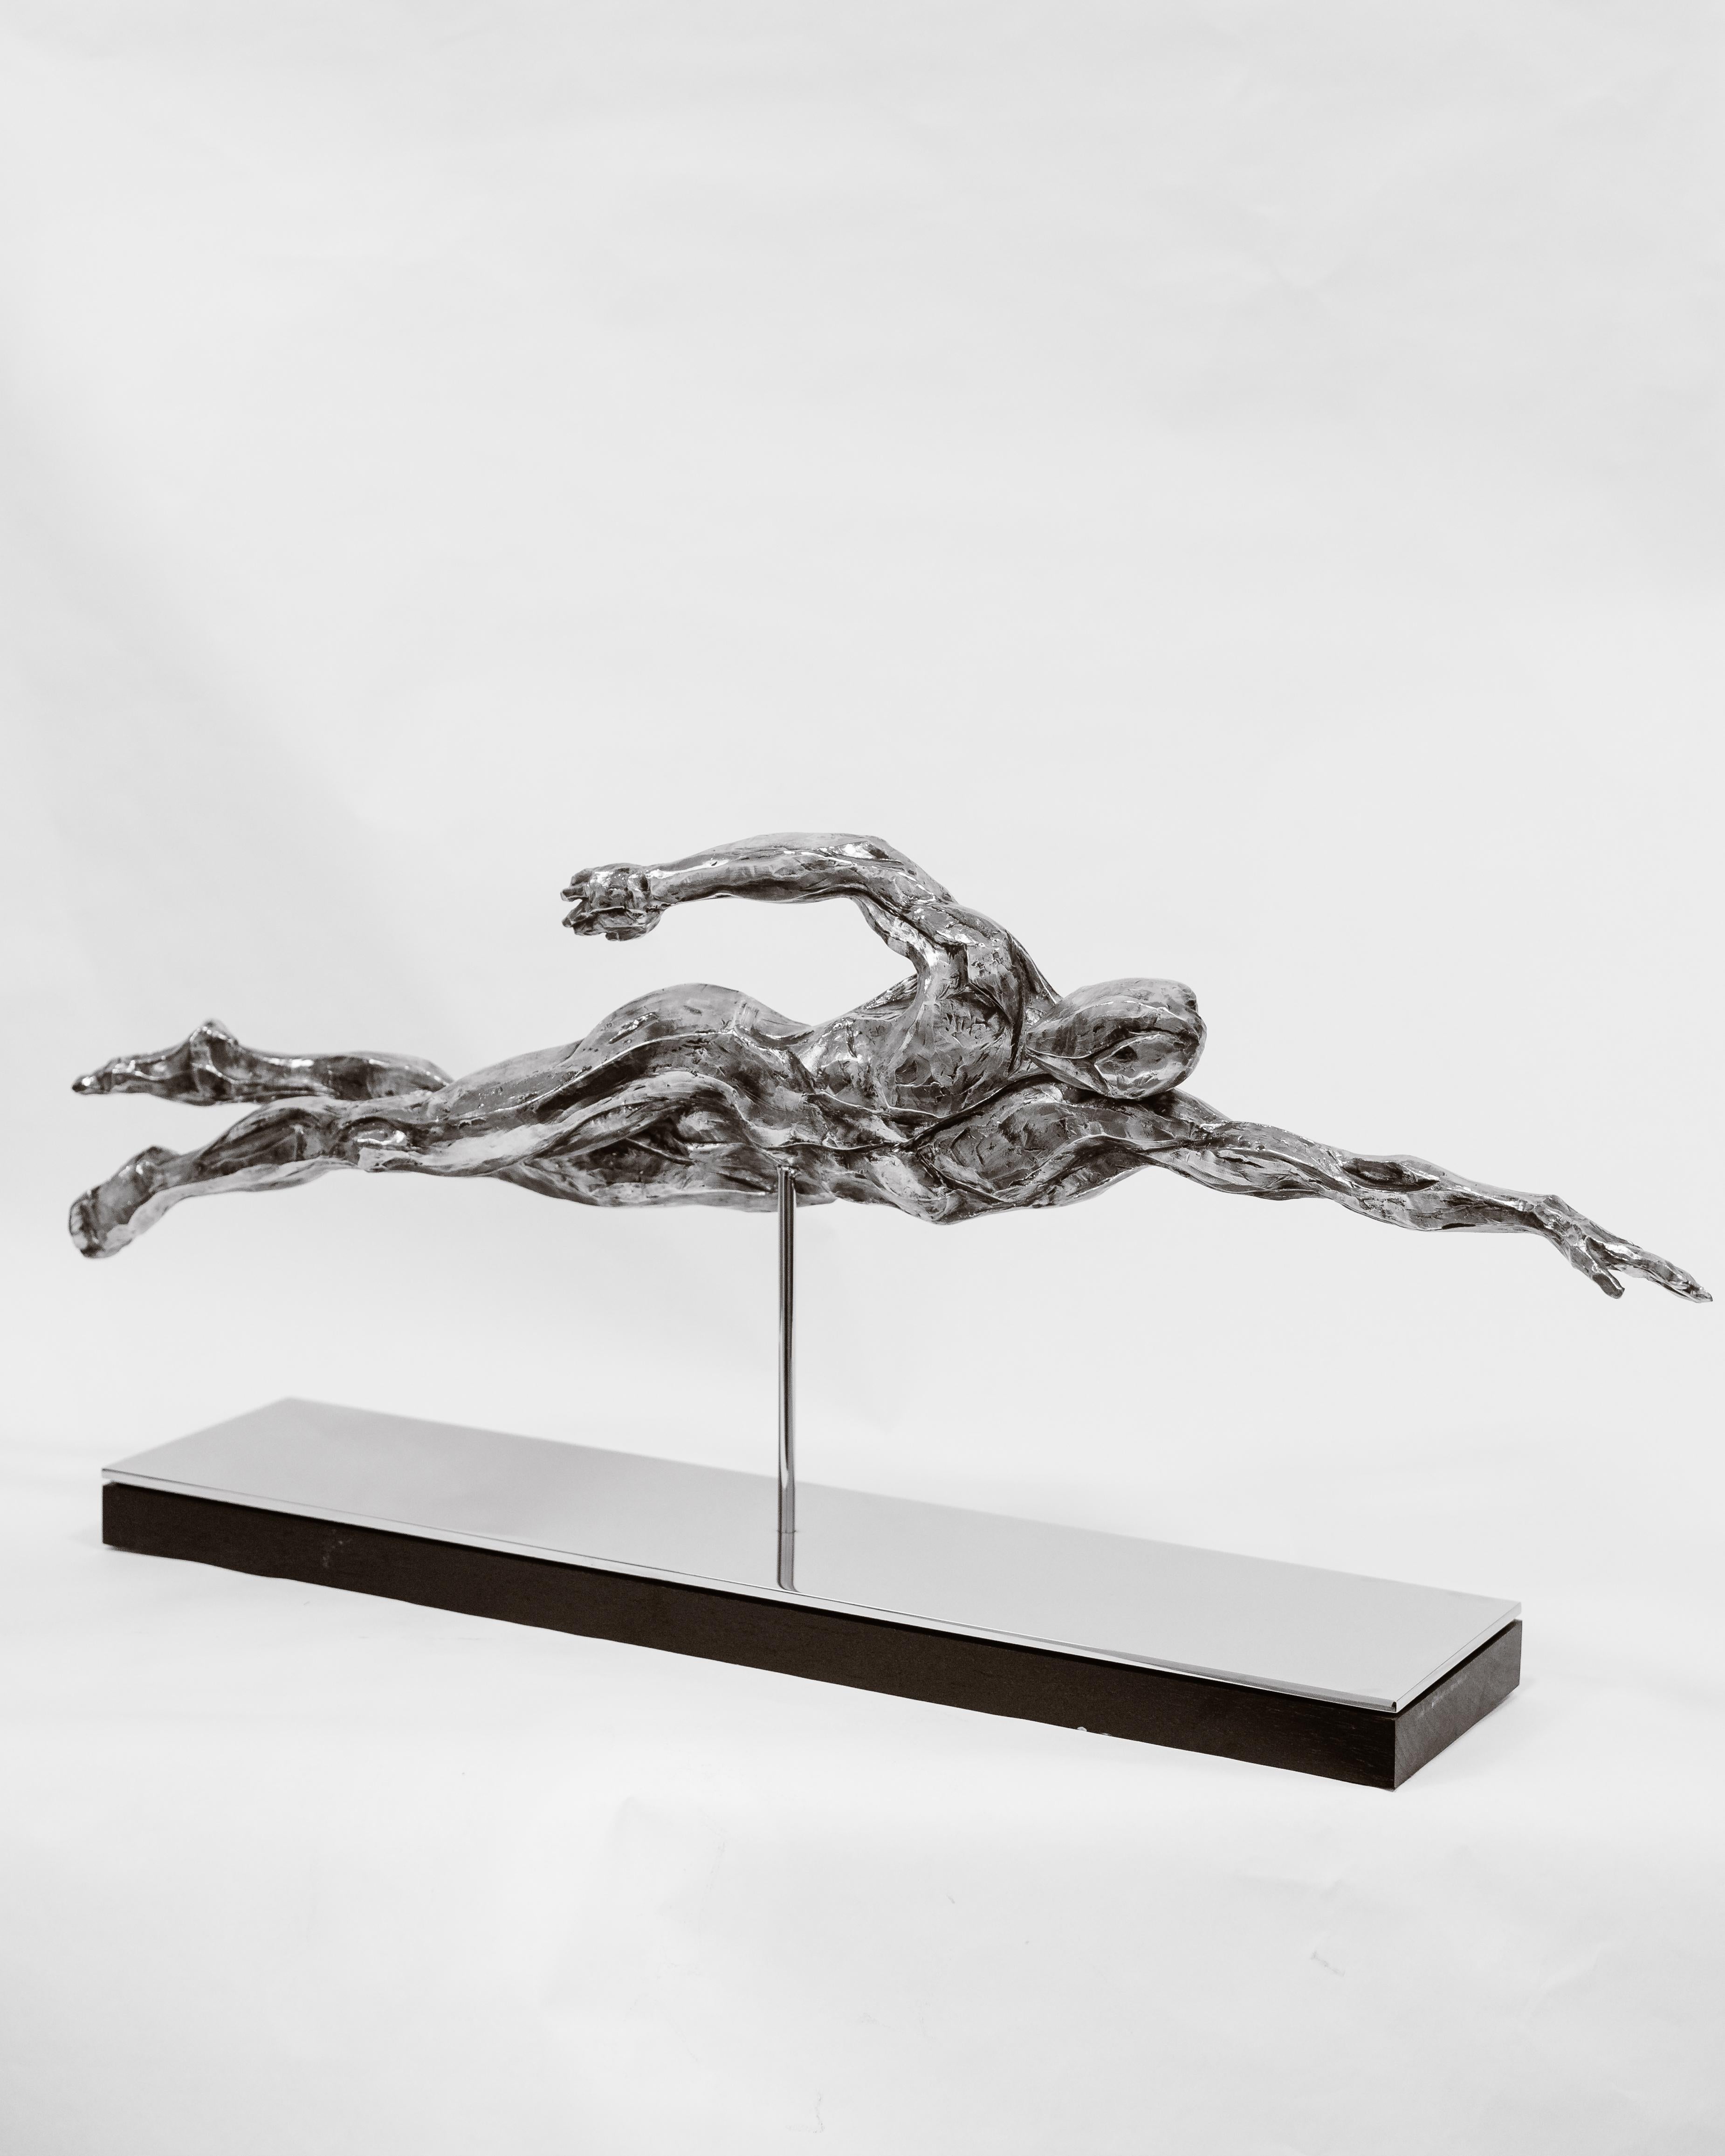 Swimmer 7/9 (Stainless Steel) - Sculpture by Gail Folwell